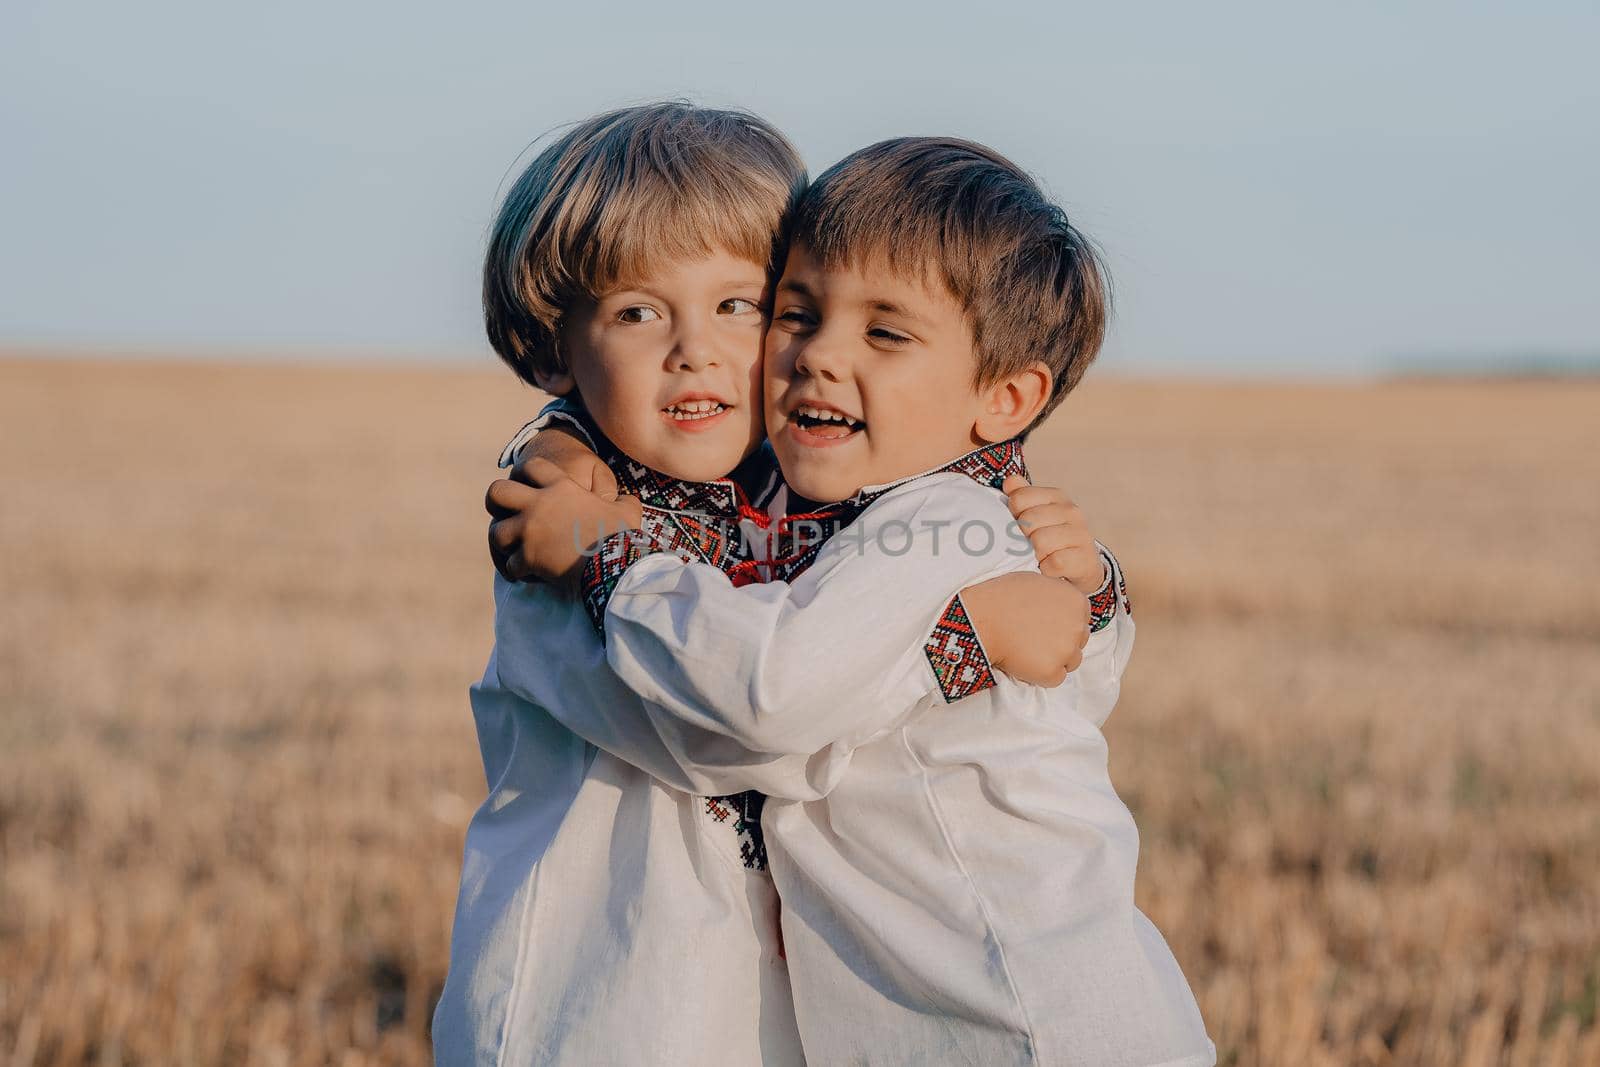 Smiling little ukrainian boys. Children together in traditional embroidery vyshyvanka shirts. Ukraine, brothers, freedom, national costume, win in war. High quality photo